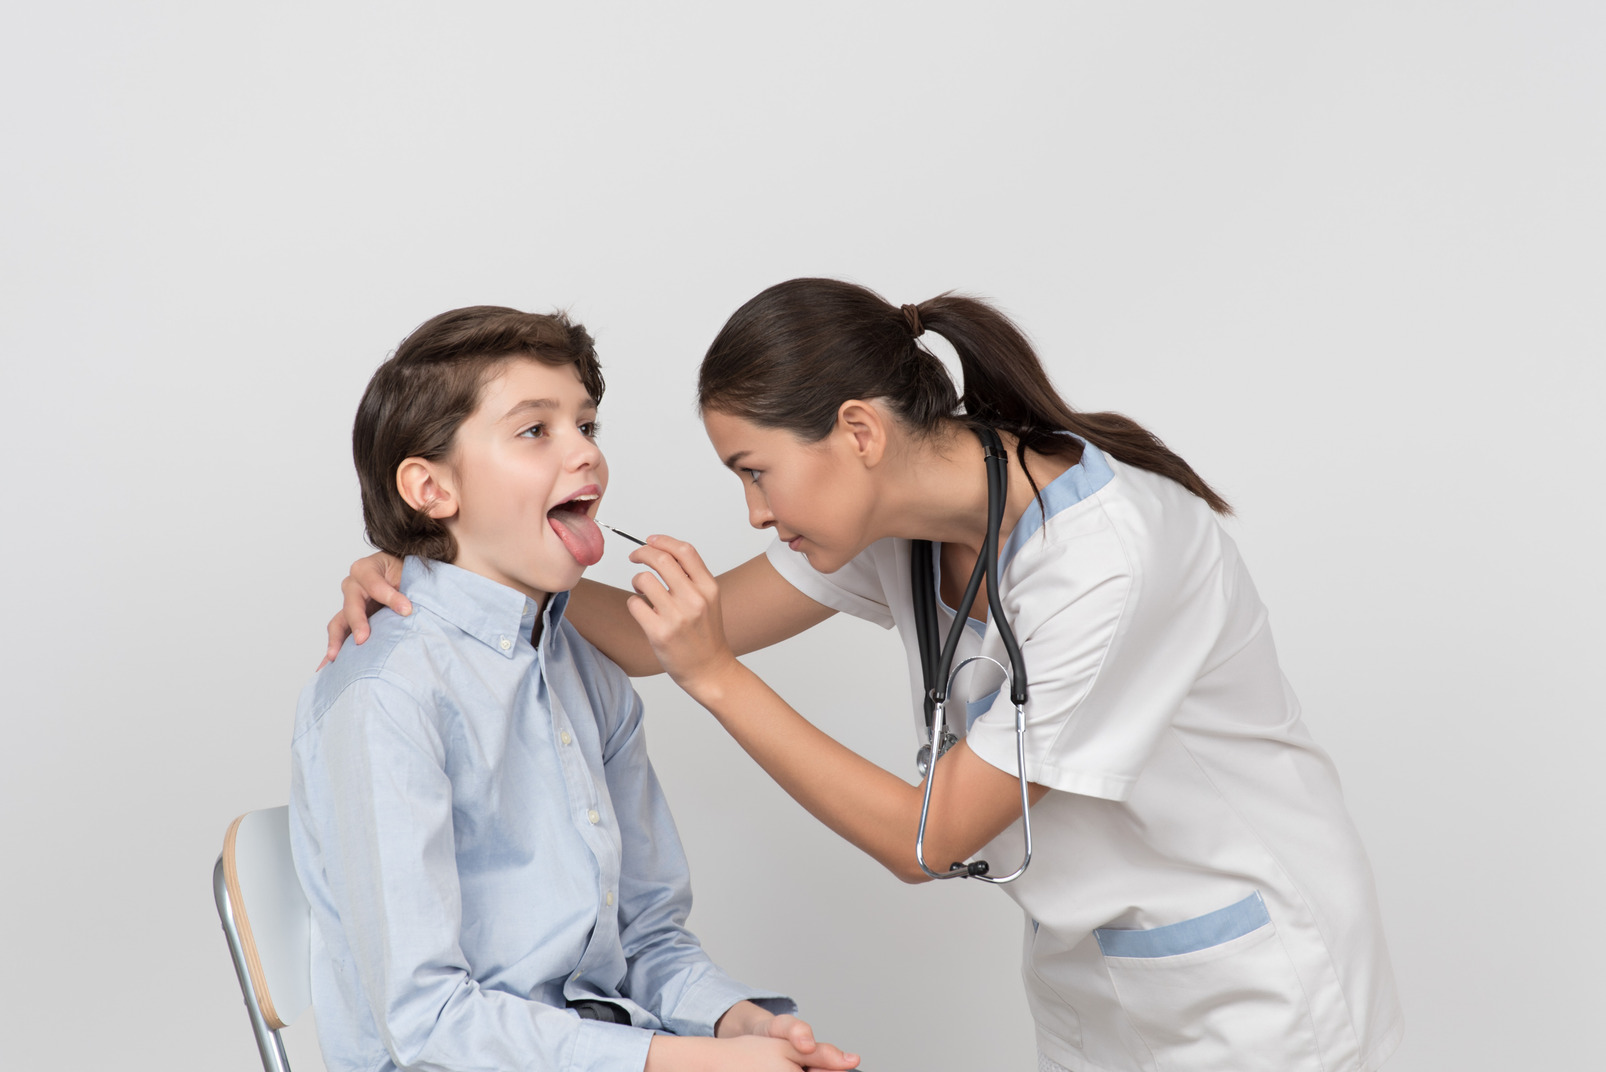 Female doctor examining patient's mouth